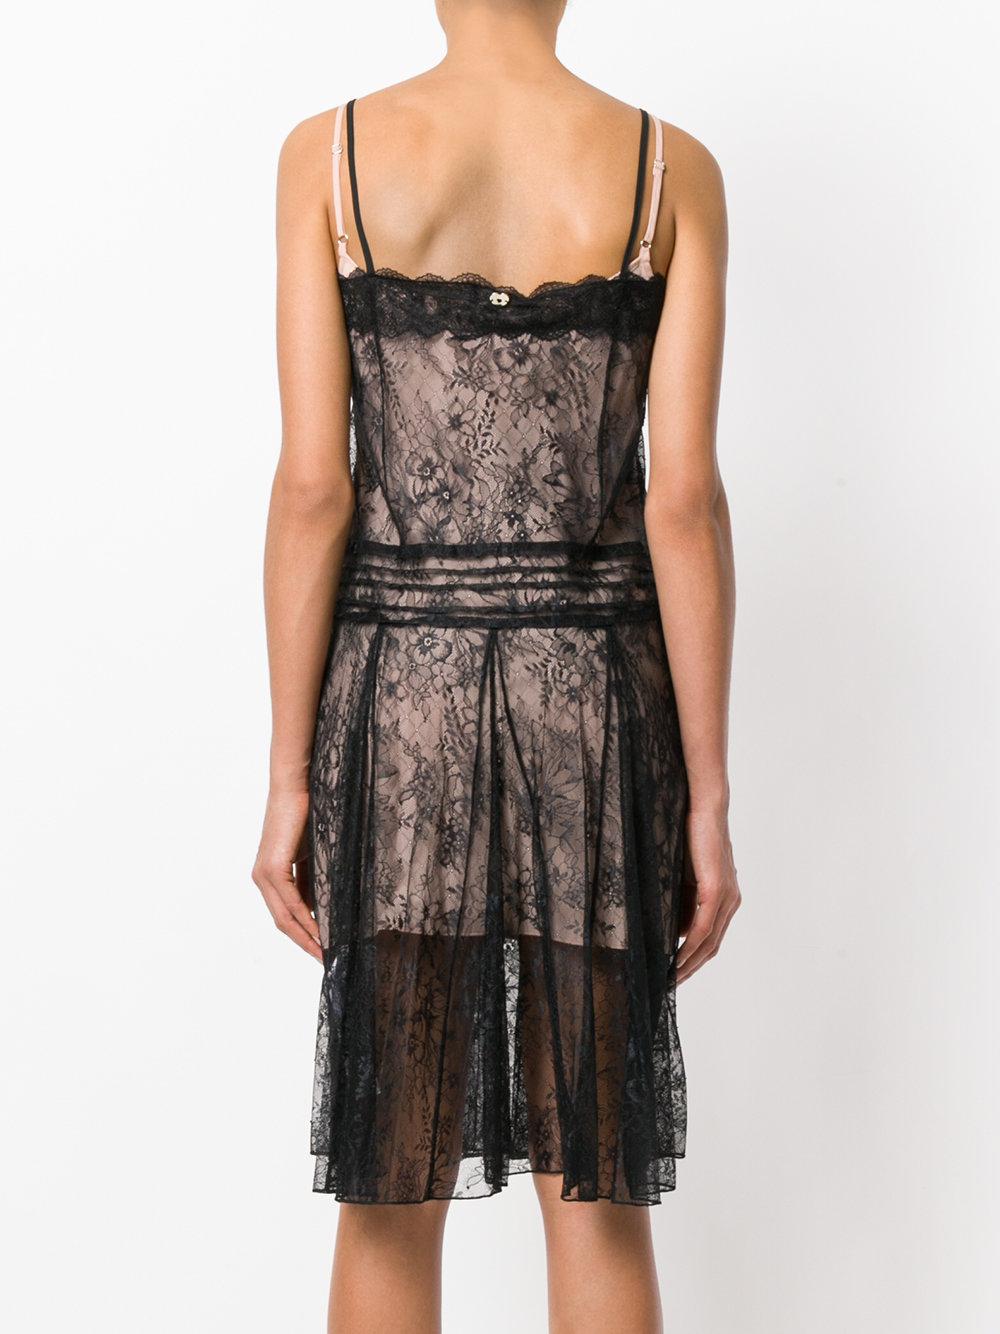 Lyst - Twin Set Fitted Lingerie Lace Dress in Black